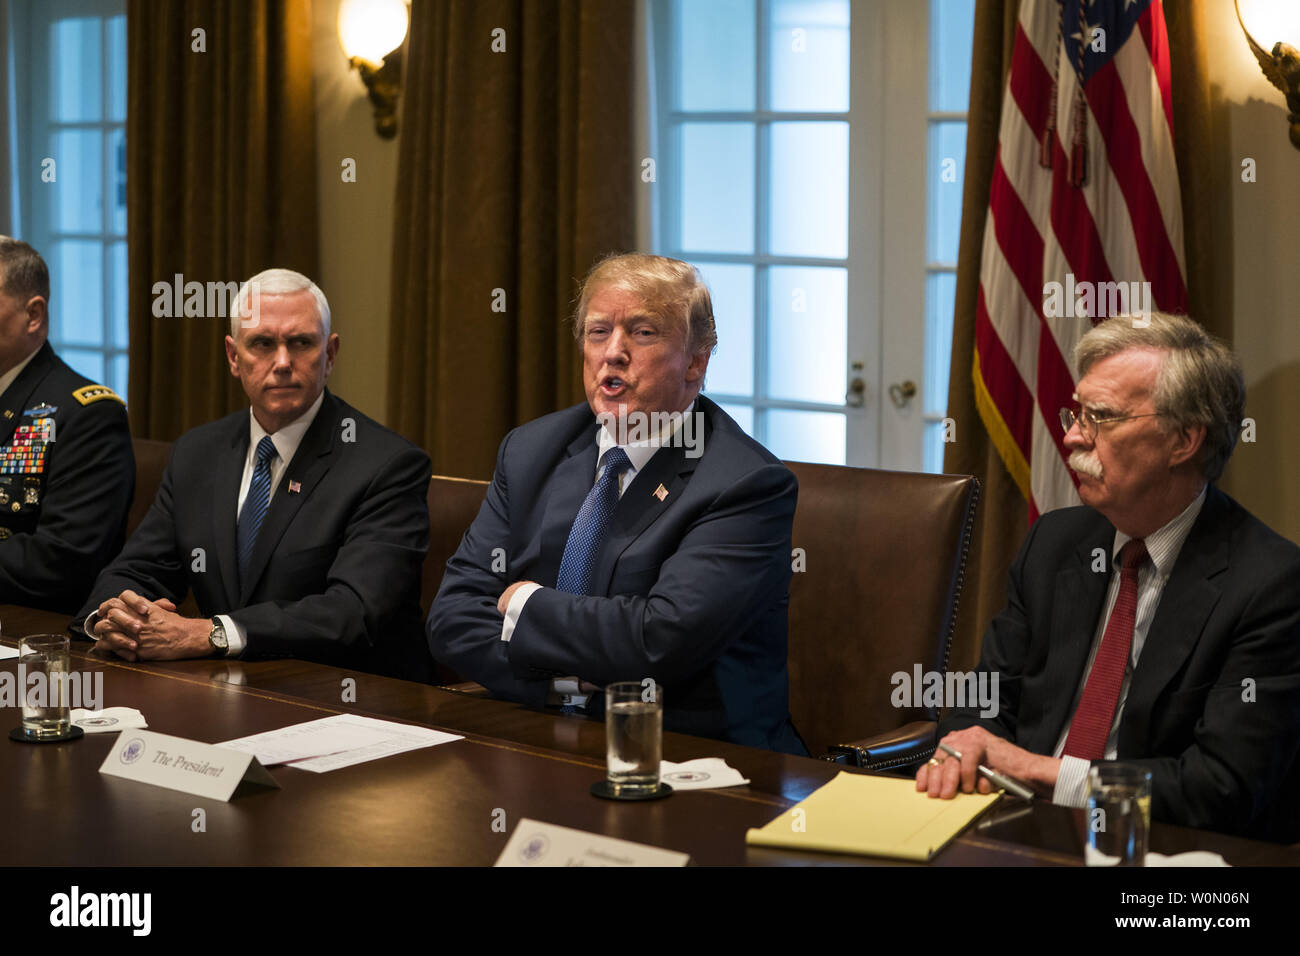 US President Donald J. Trump speaks with the media before a meeting with his military leadership in the Cabinet Room of the White House in Washington DC, on April 9, 2018. Trump said he will decide in the next few days whether the US will respond militarily for the reported chemical weapons attack in Syria. Trump also spoke about the FBI raid of his personal attorney Michael Cohen's office.      Photo by Jim Lo Scalzo/UPI Stock Photo